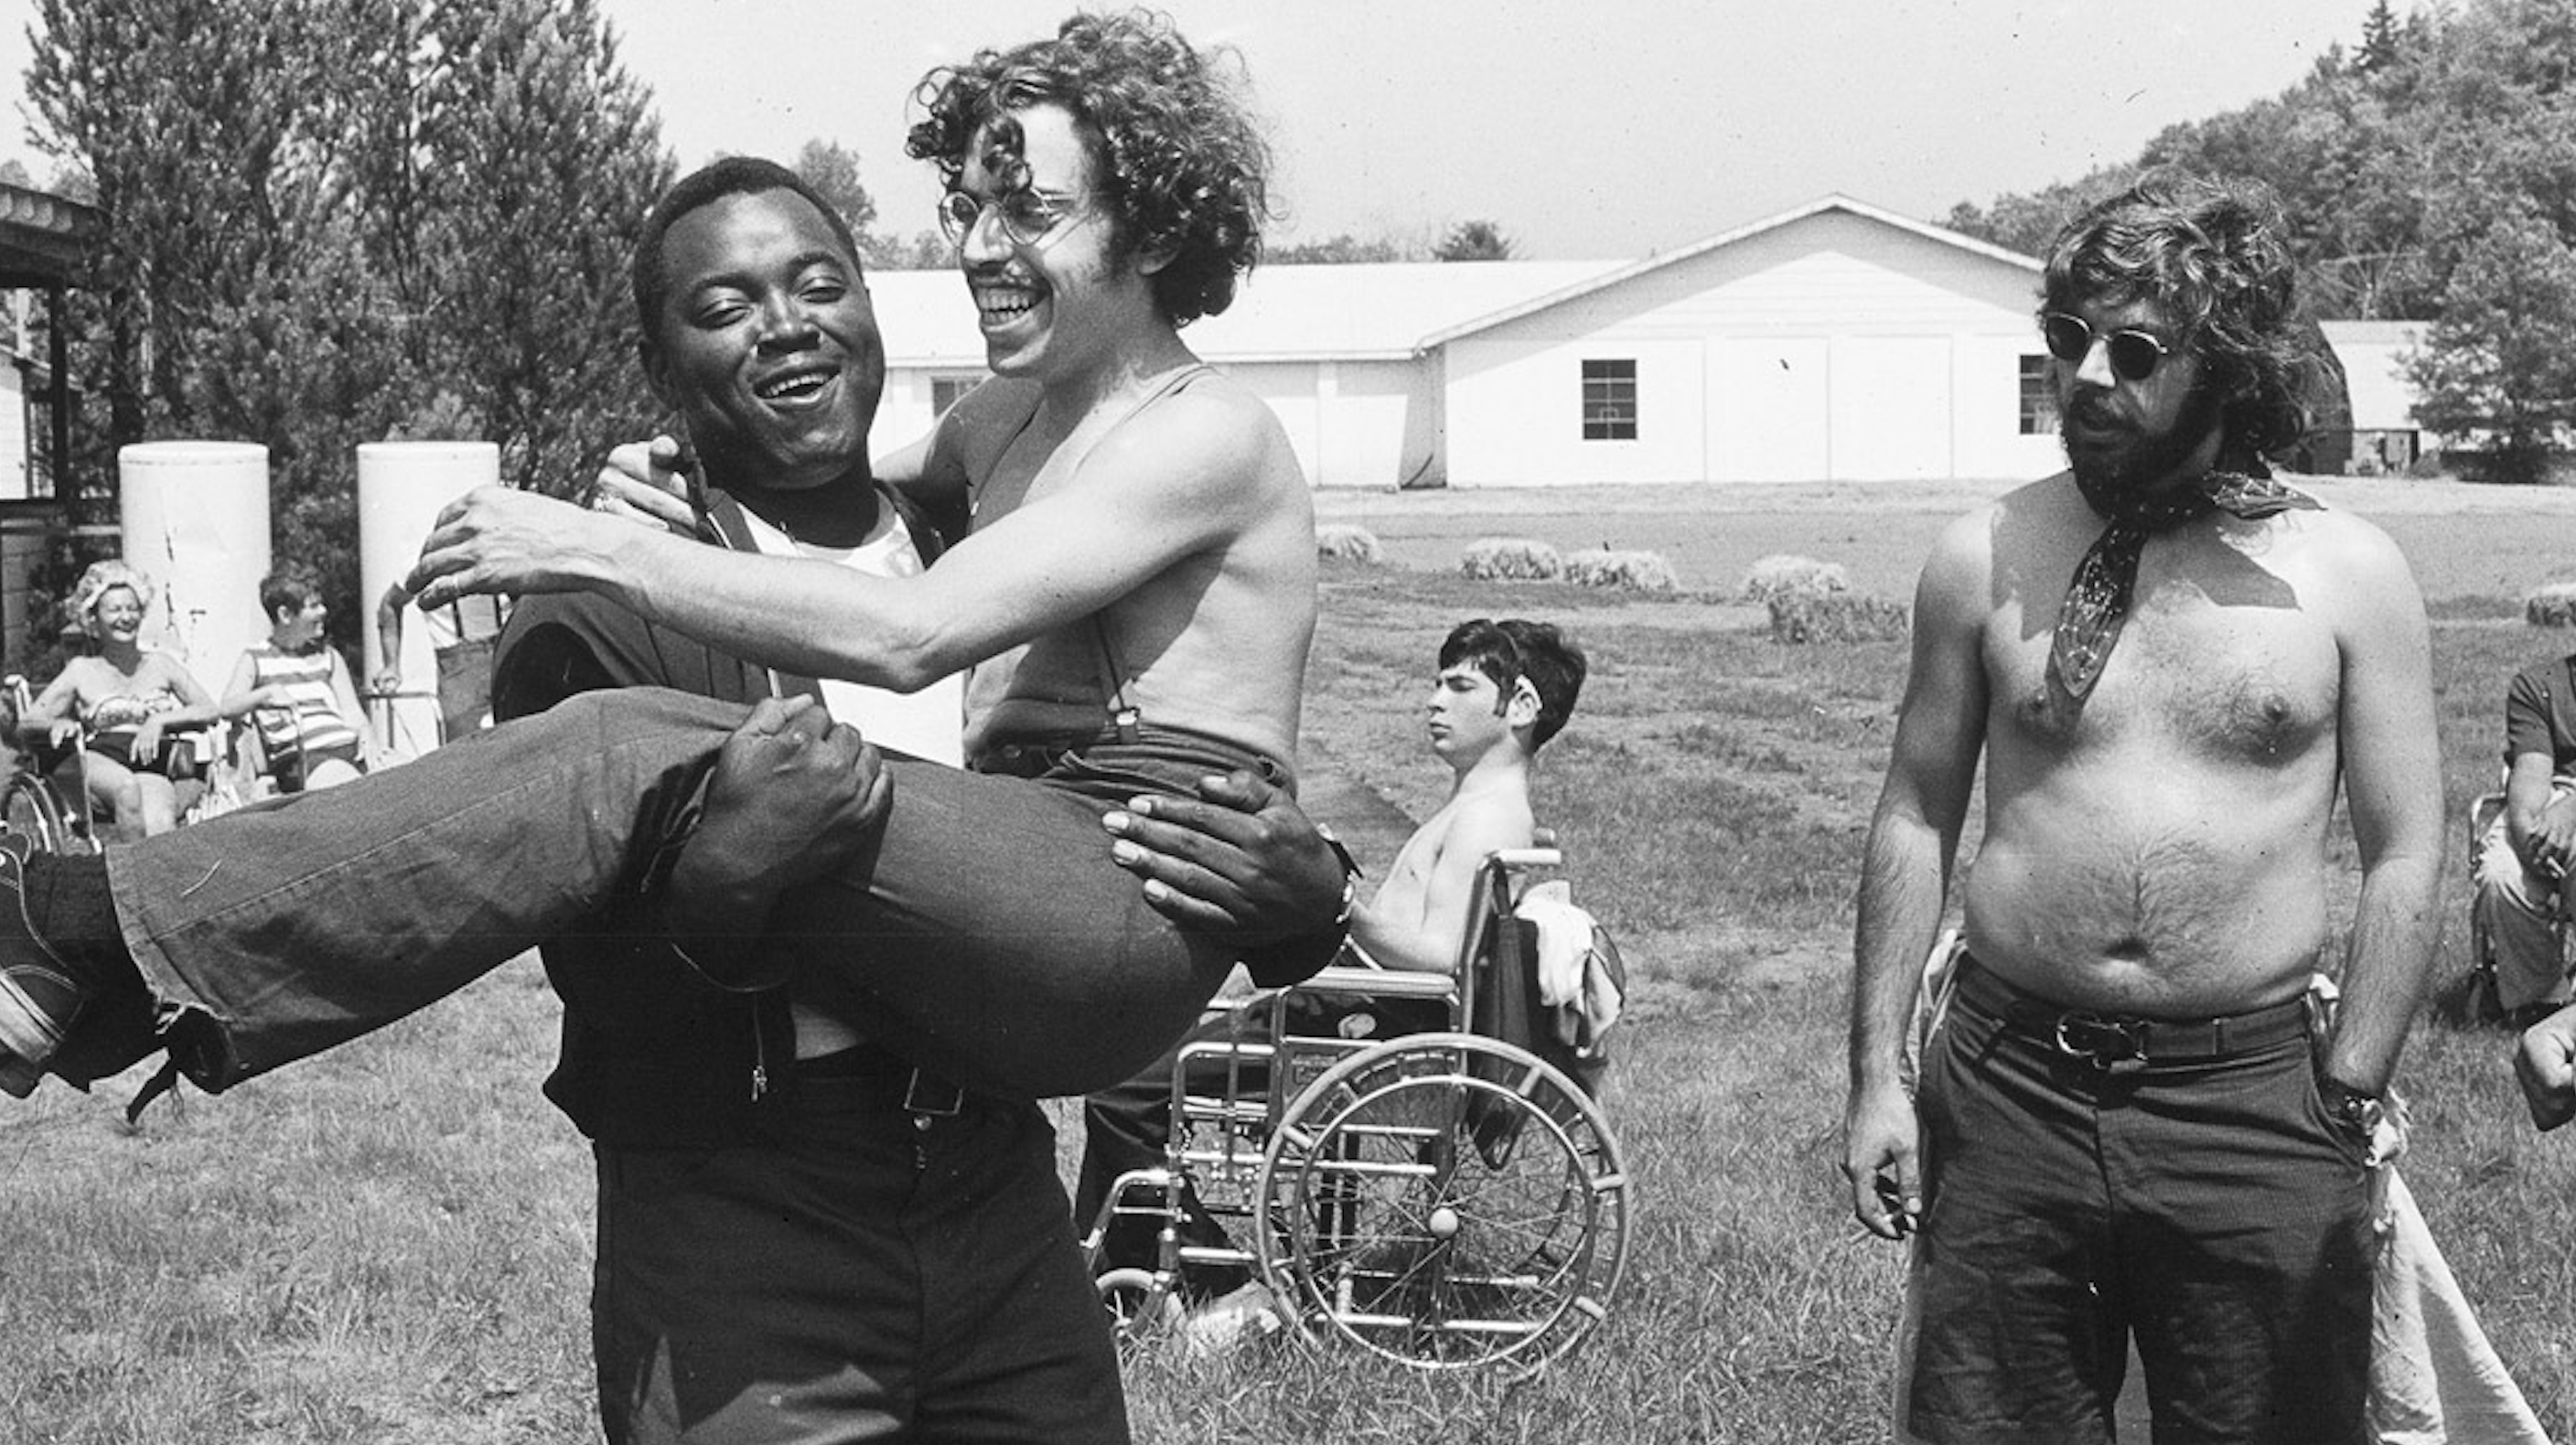 Crip Camp Movie Review - 2020 Documentary Film by James Lebrecht and Nicole Newnham